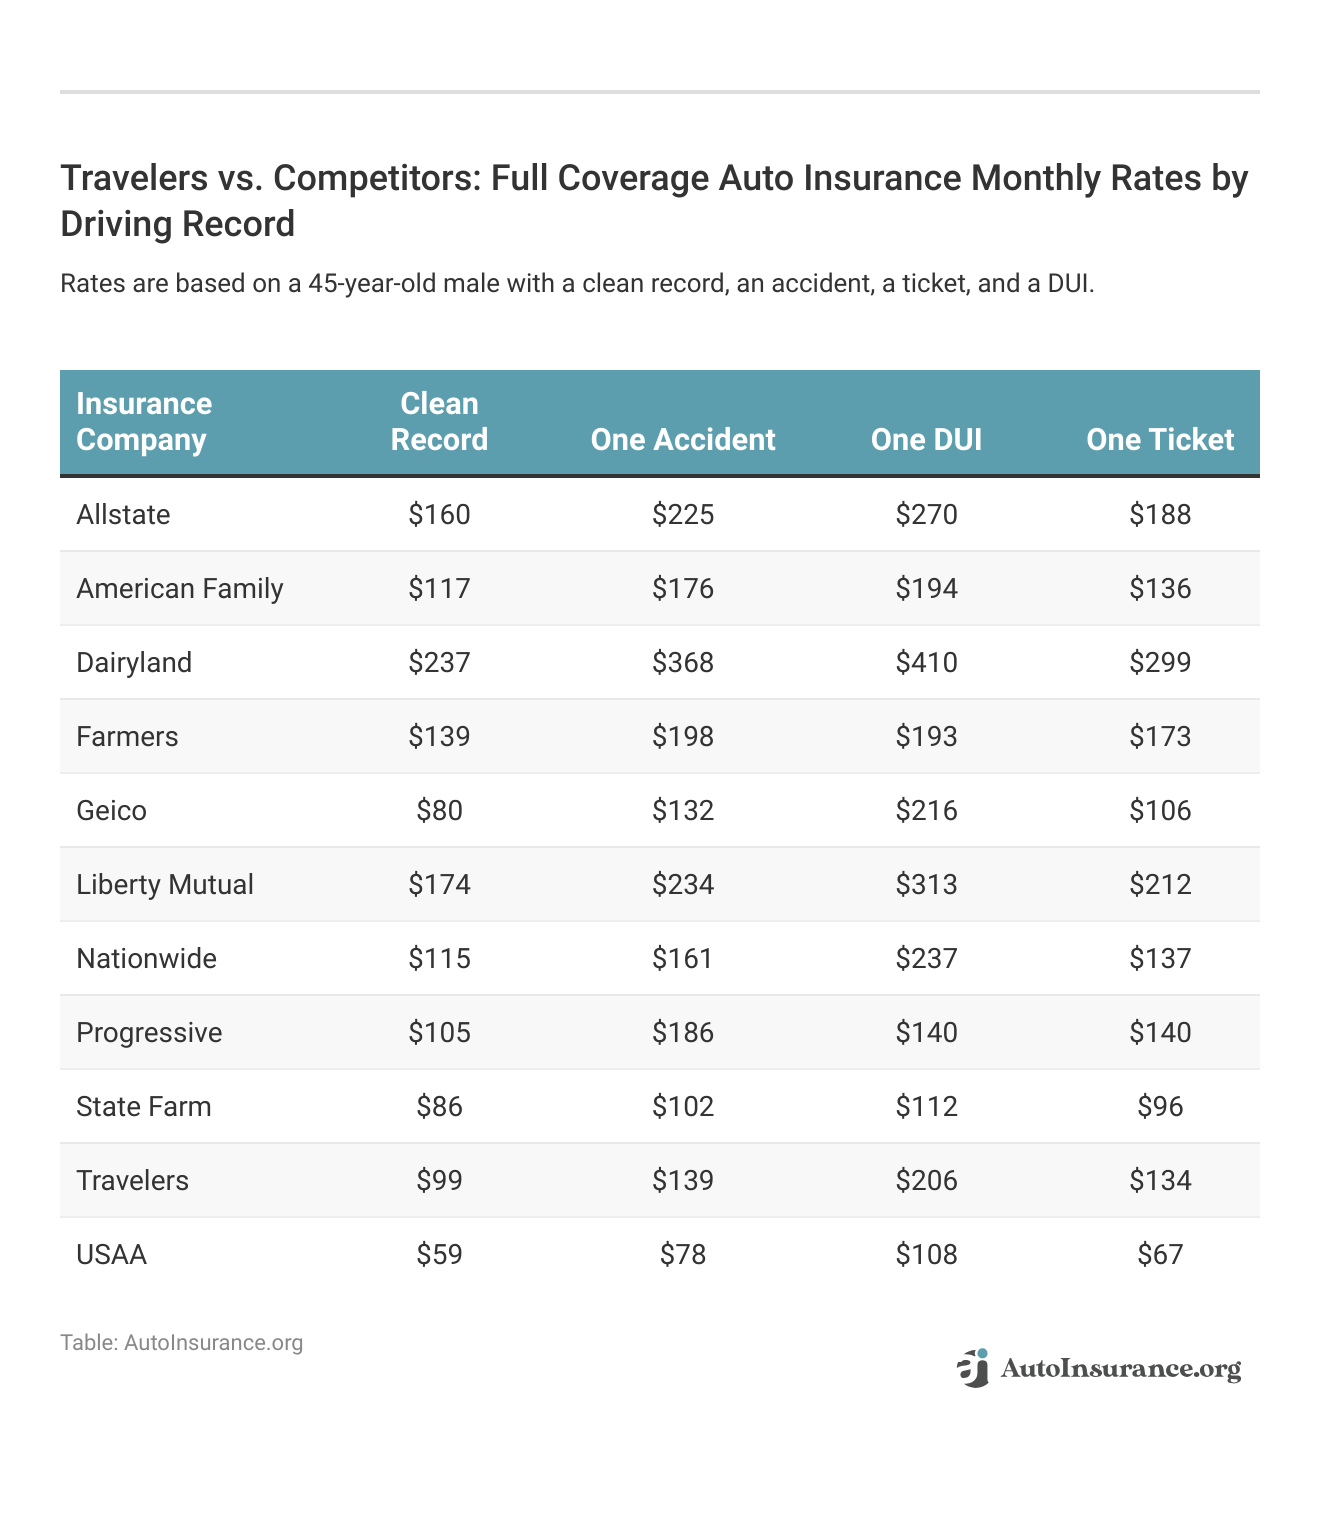 <h3>Travelers vs. Competitors: Full Coverage Auto Insurance Monthly Rates by Driving Record</h3>